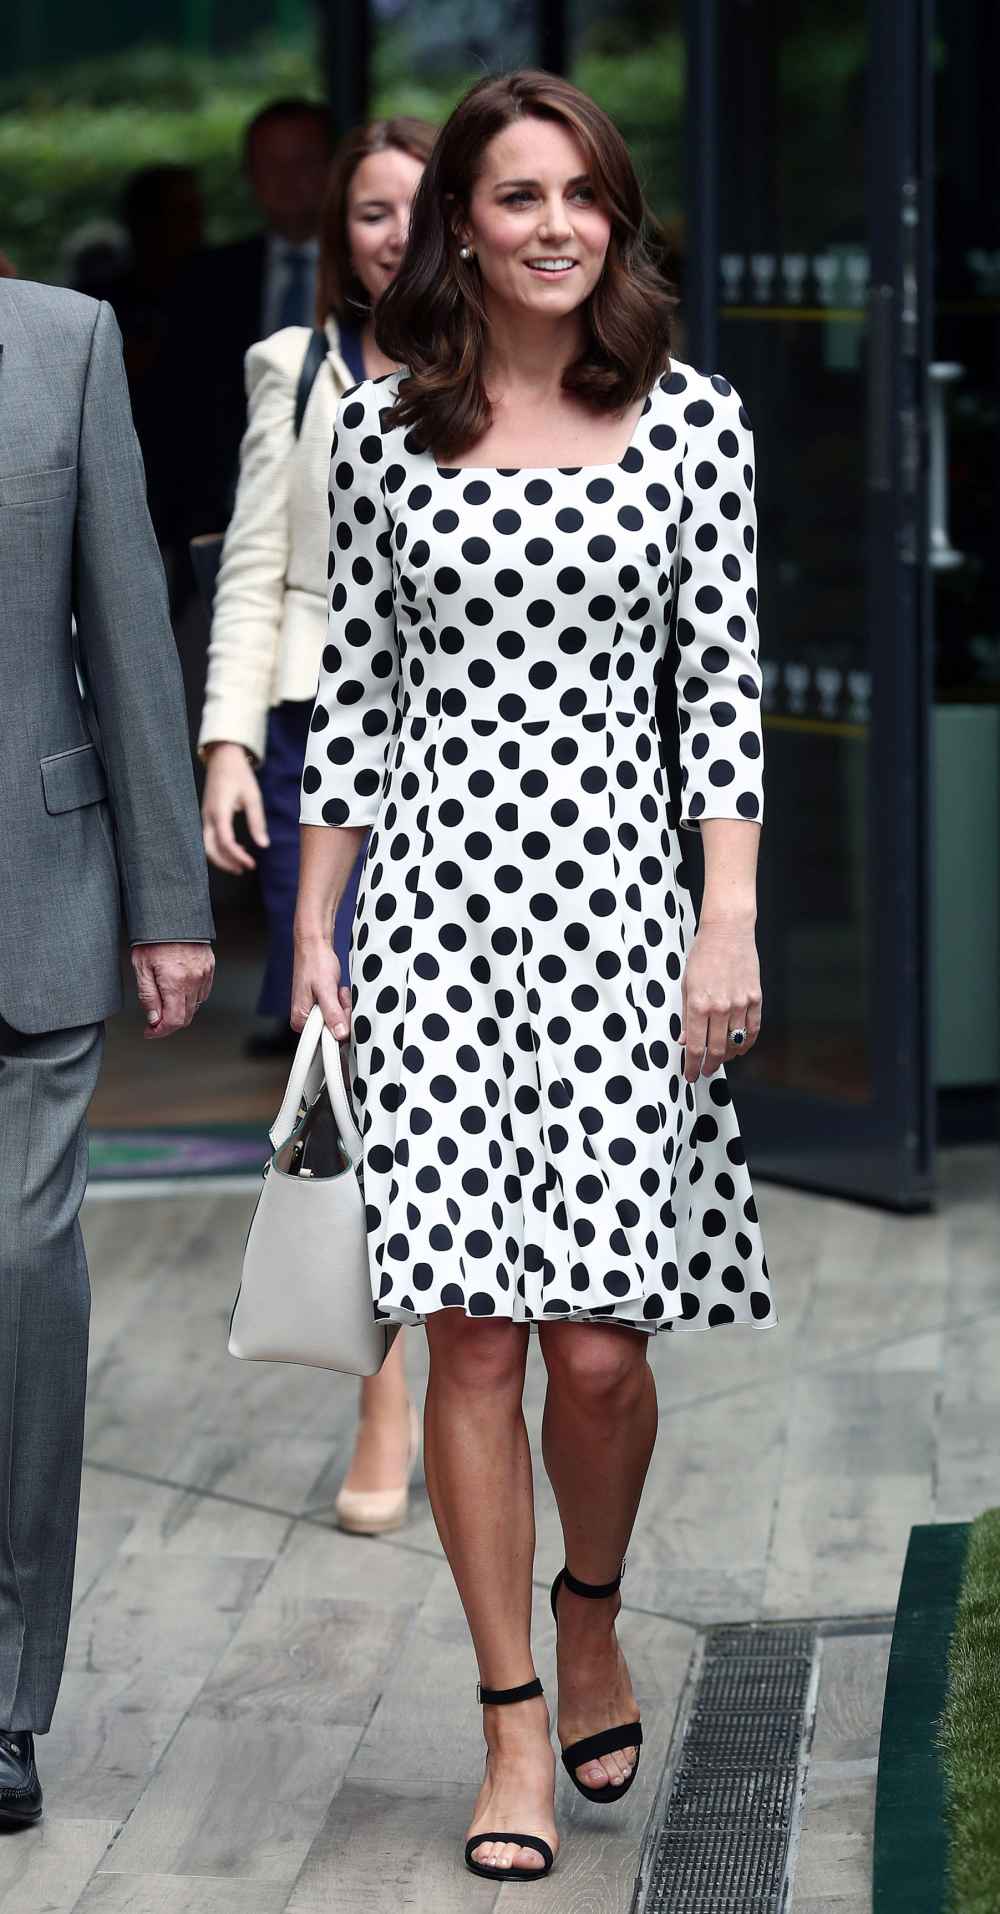 Kate Middleton made polka dot dresses her style signature at